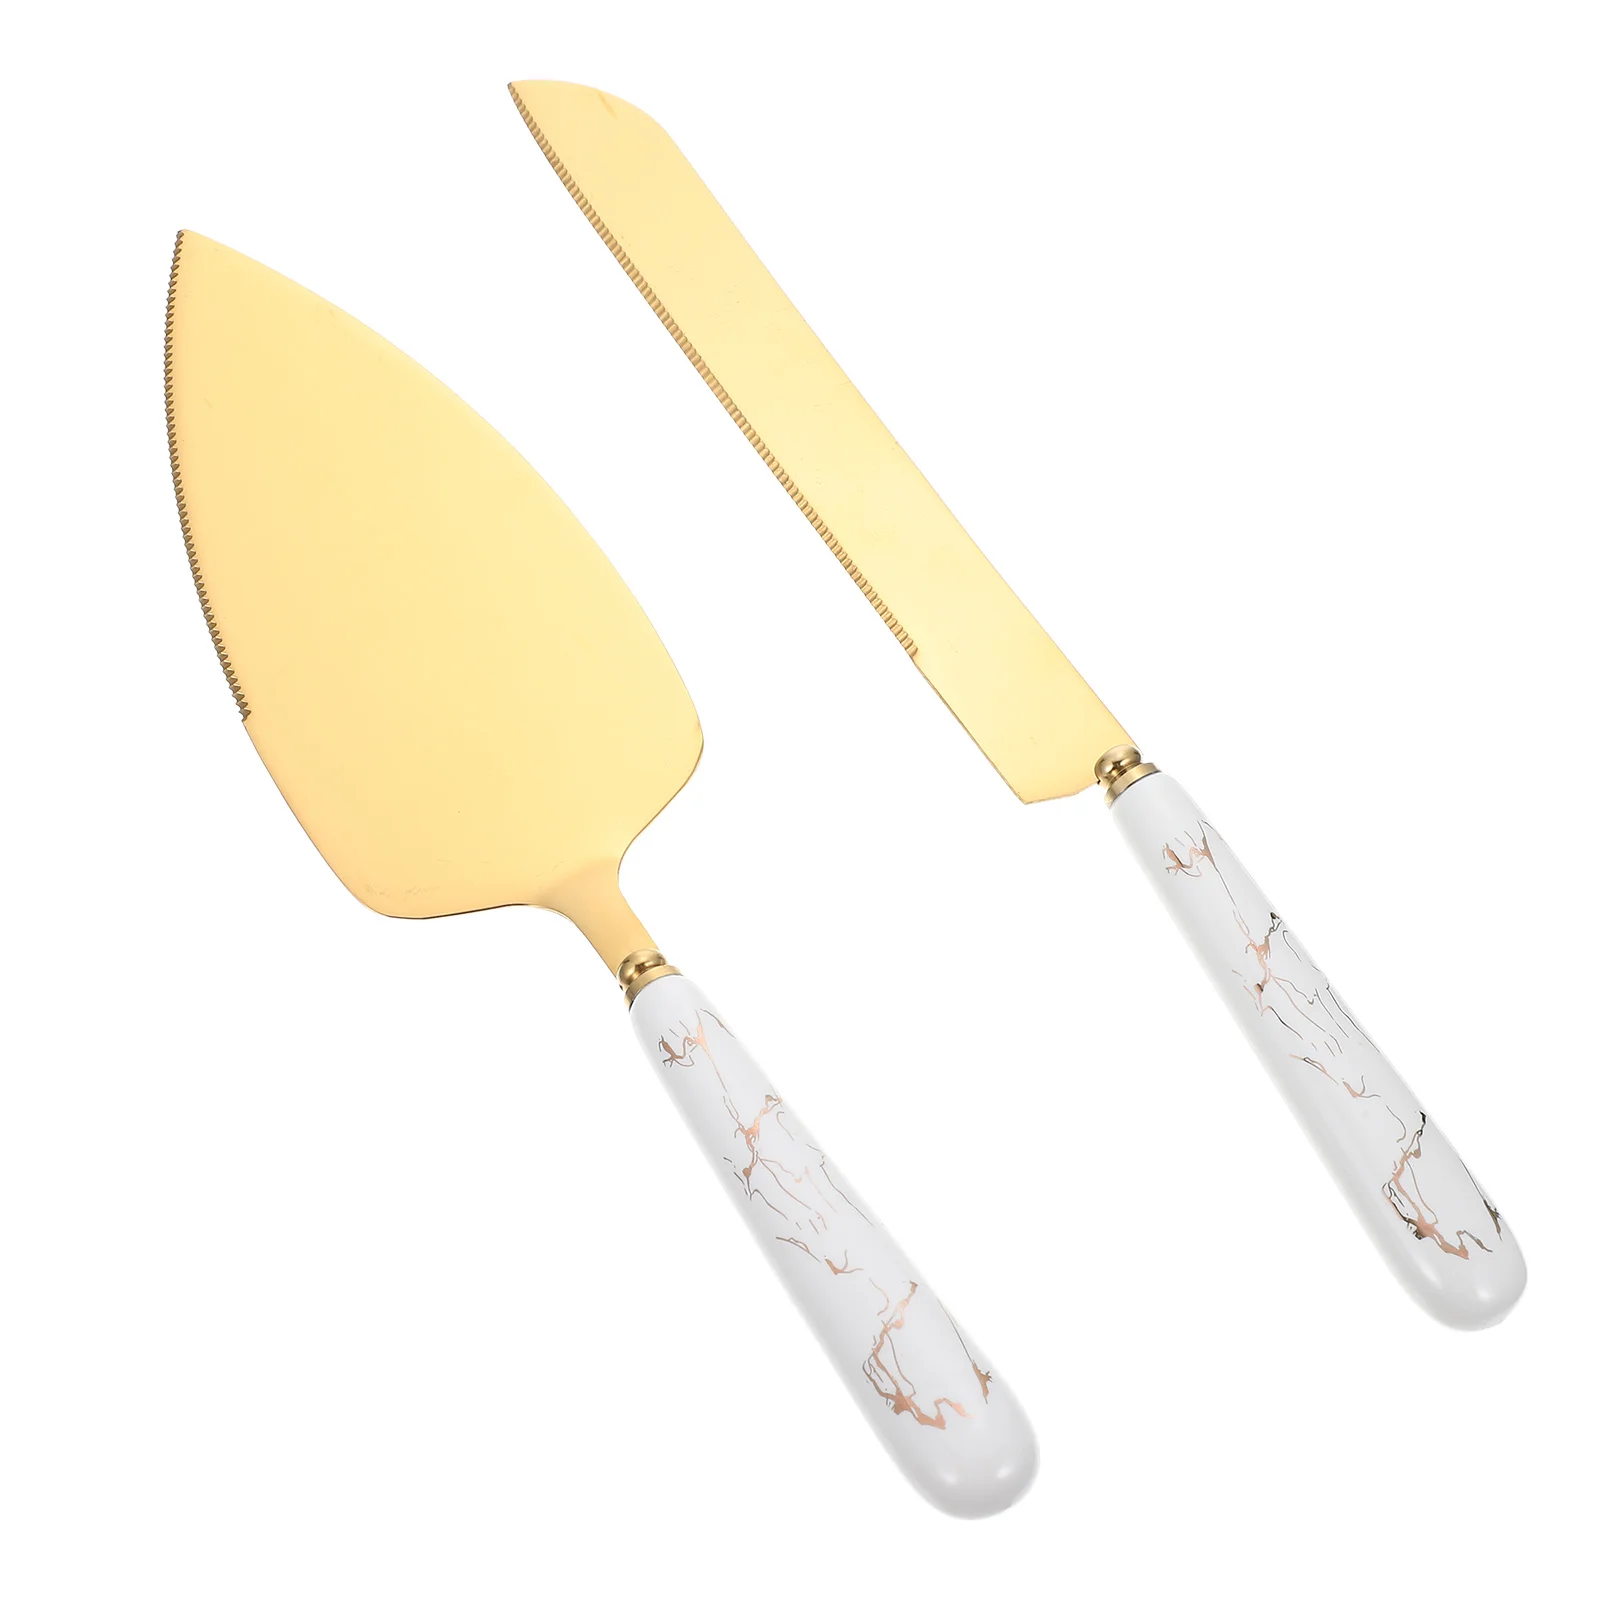 

Cake Server Spatula Pizza Set Pie Steel Lifter Stainless Cheese Wedding Butter Dessert Cutting Tool Handle Serving Gold Party